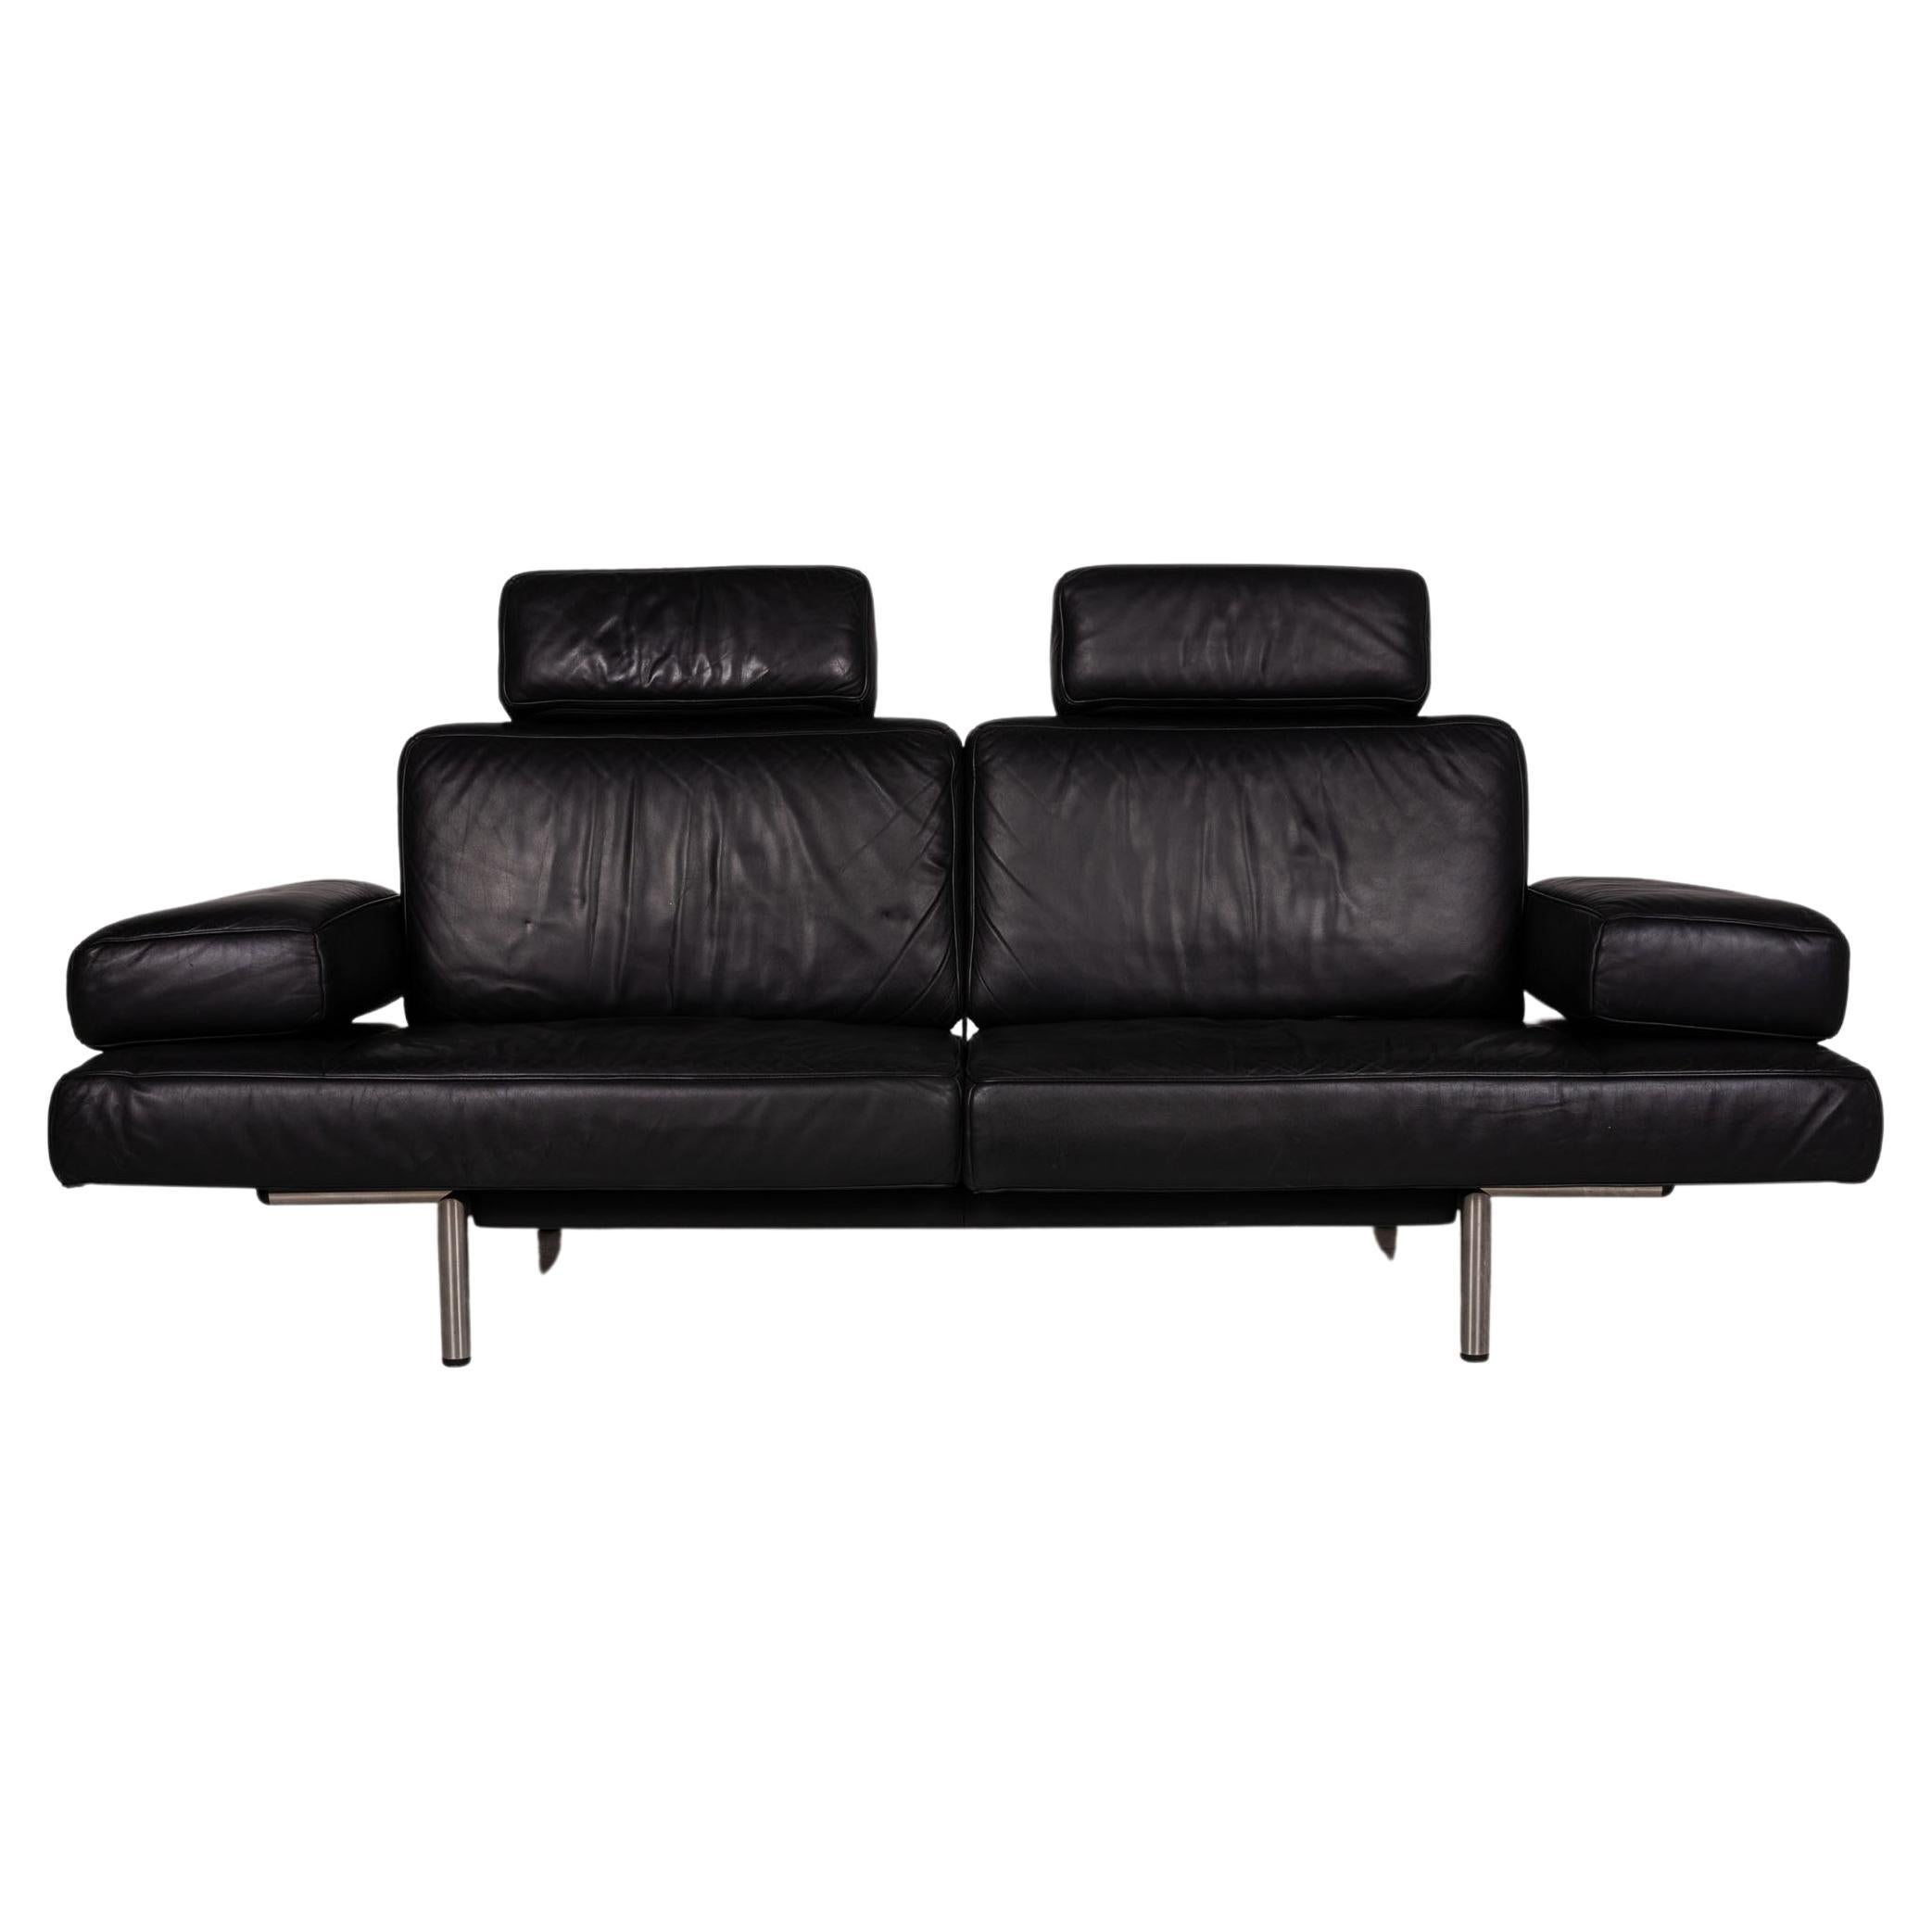 De Sede DS 460 Leather Sofa Black Three-Seater Relaxation Function Couch For Sale